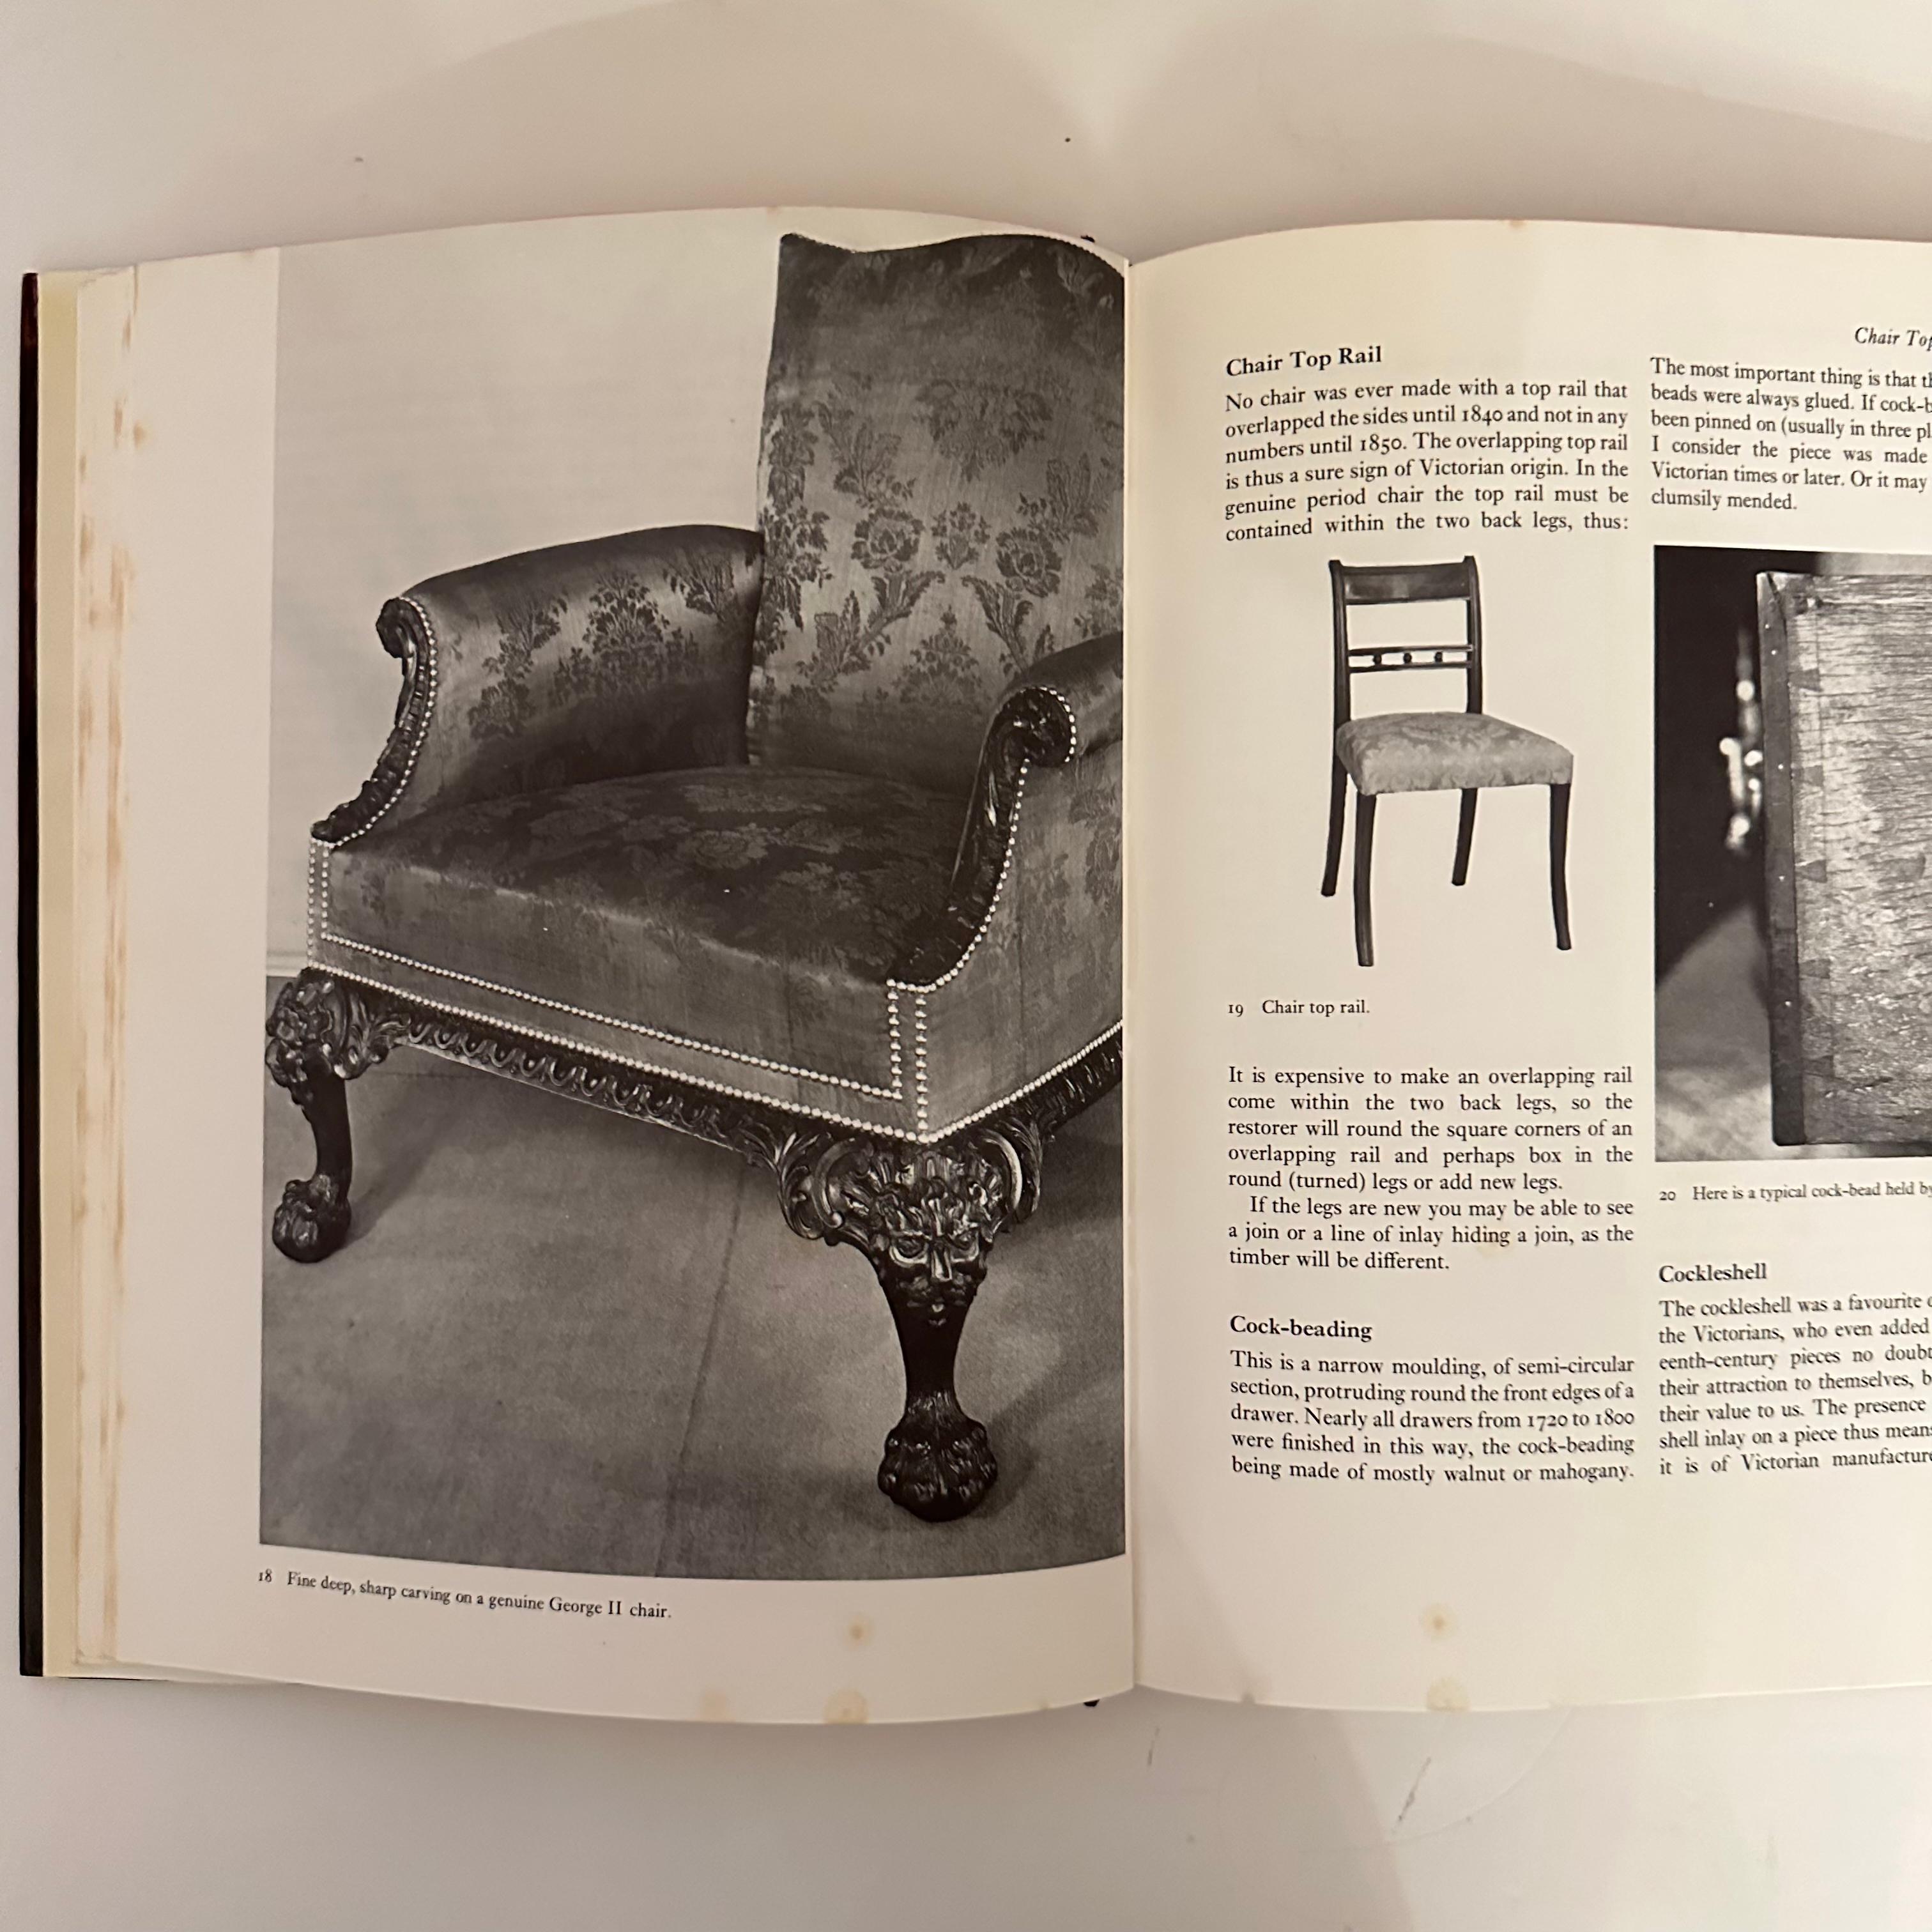 First Edition Hardback in Dust Jacket, published by Eyre & Spottiswoode, London, 1971. Text in English.

“There is probably not enough genuine eighteenth-century furniture for sale to keep more than one shop going in London, and another in the North